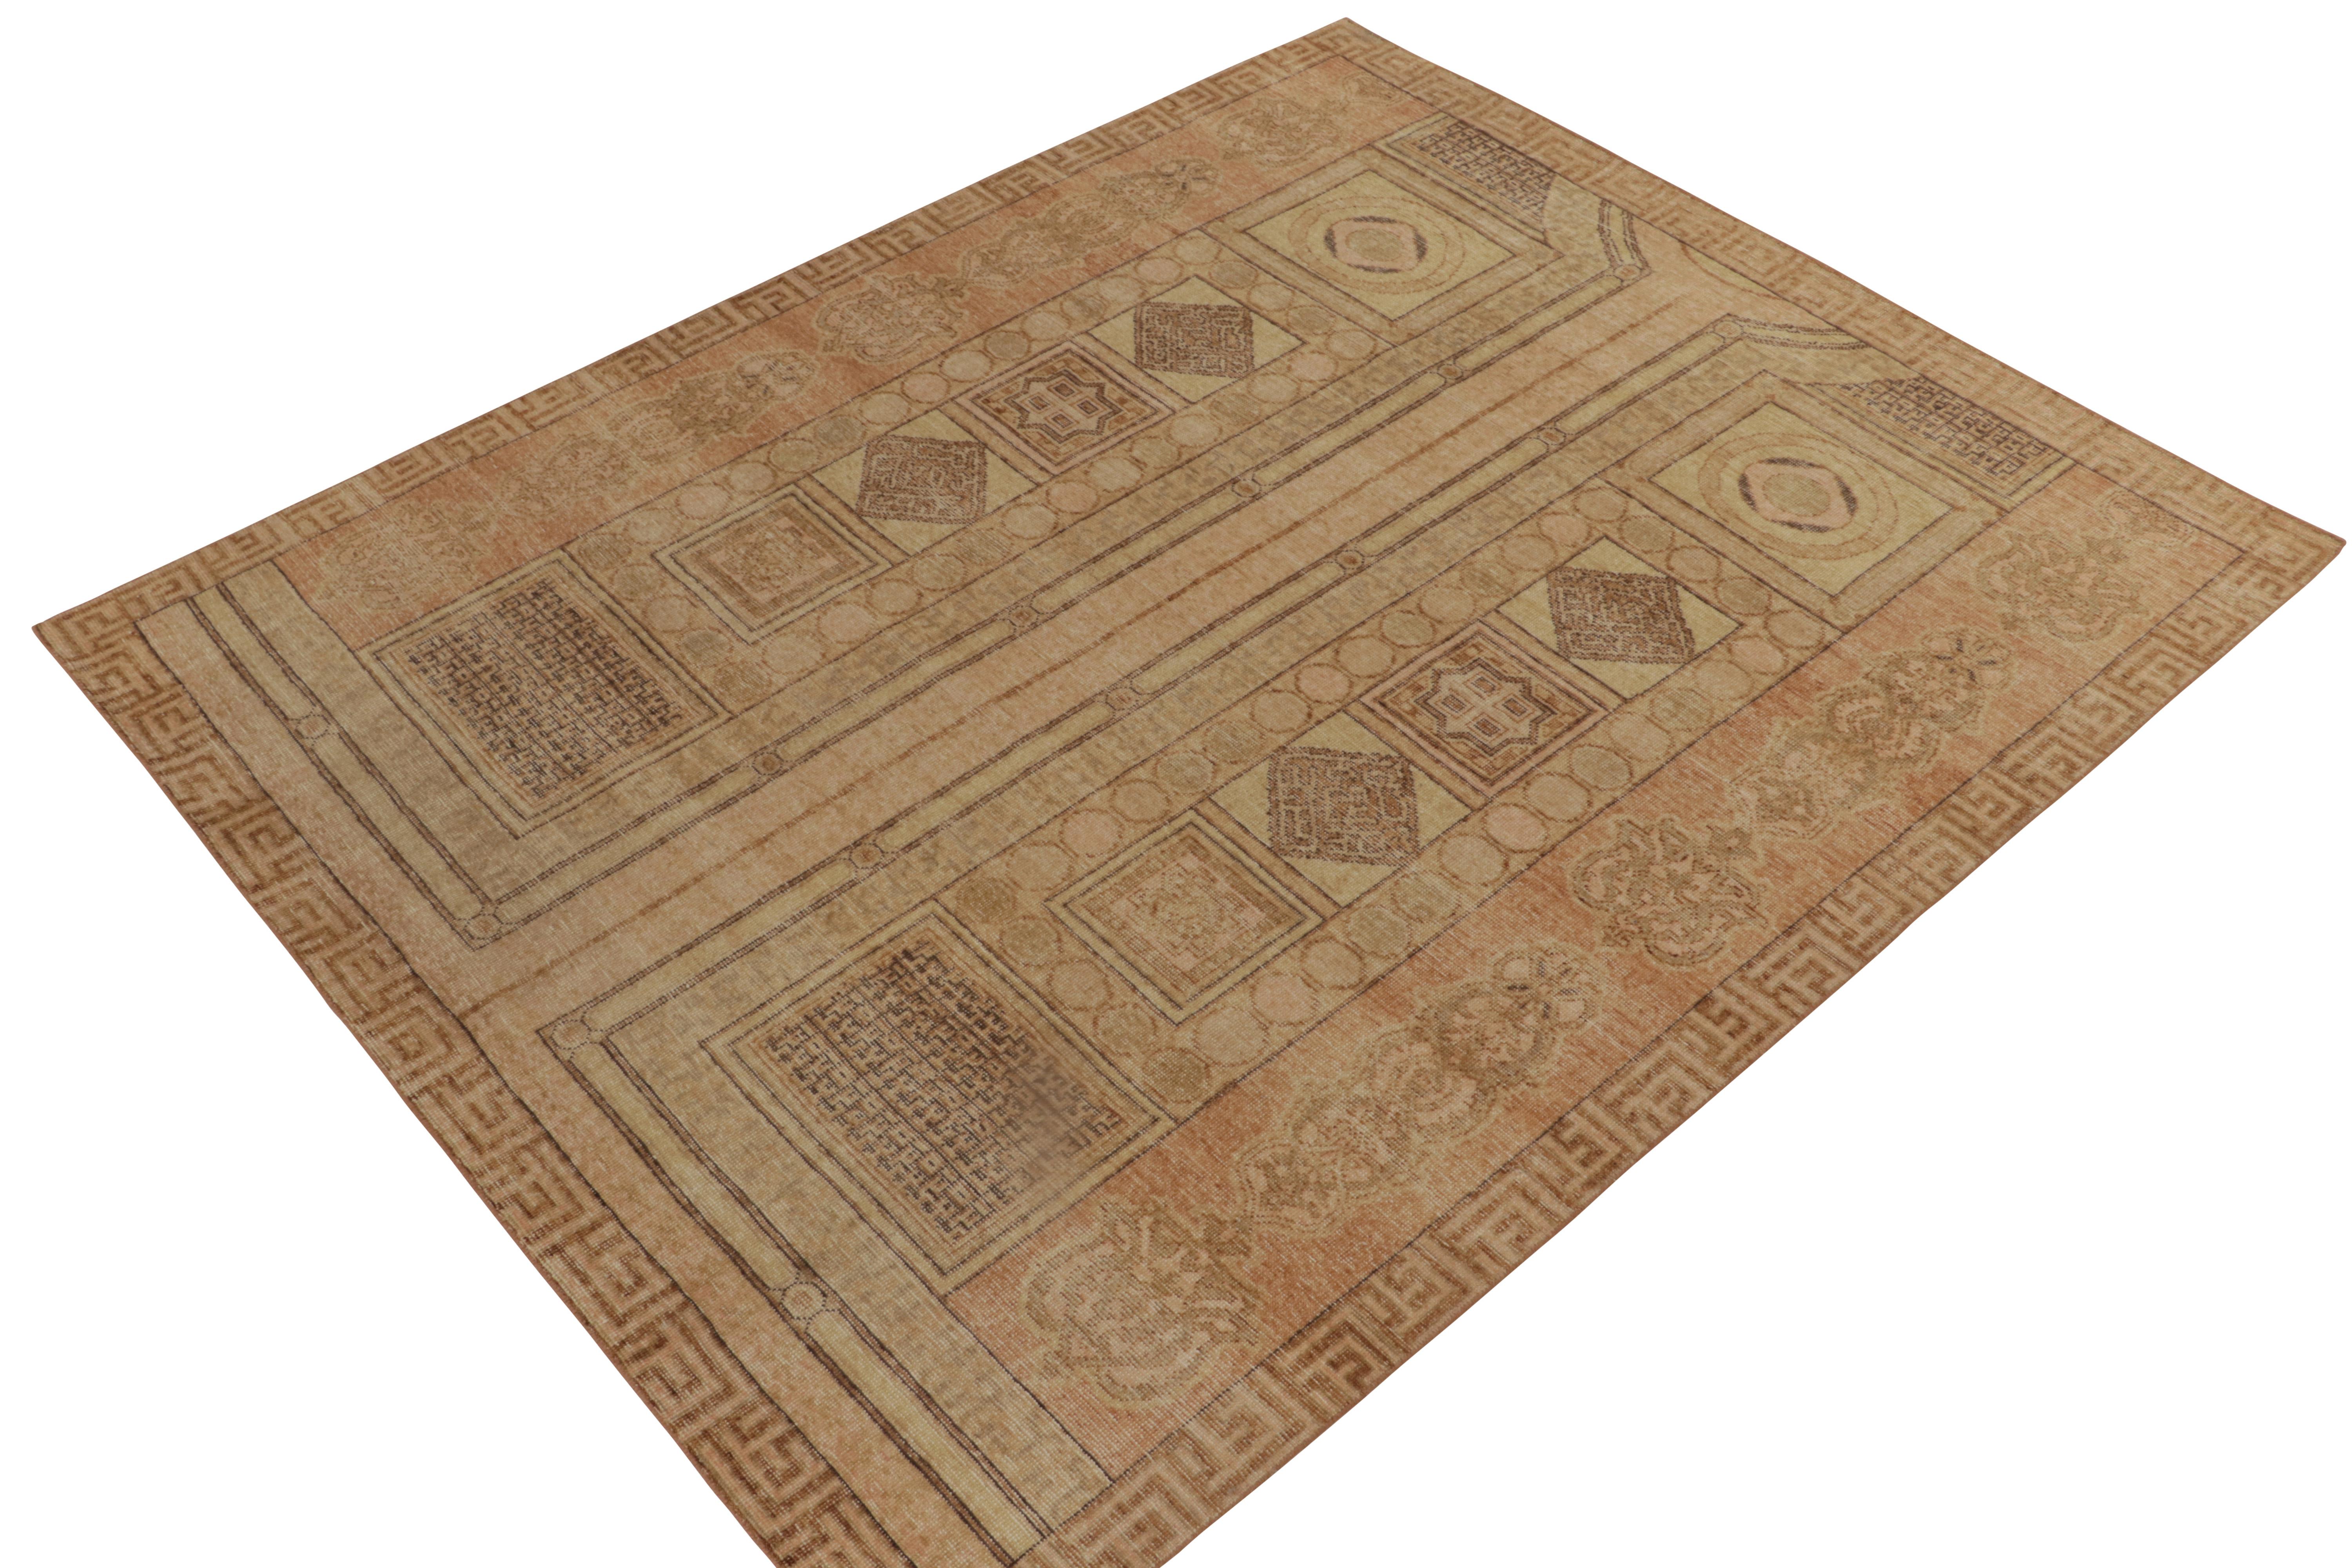 An 8x10 hand-knotted wool rug from Rug & Kilim’s Homage Collection. 

On the Design: Inspired by rare Ottoman textile designs of antiquity, the vision reimagines Islamic motifs, Kufic writing & geometric patterns in a charming play of beige-brown